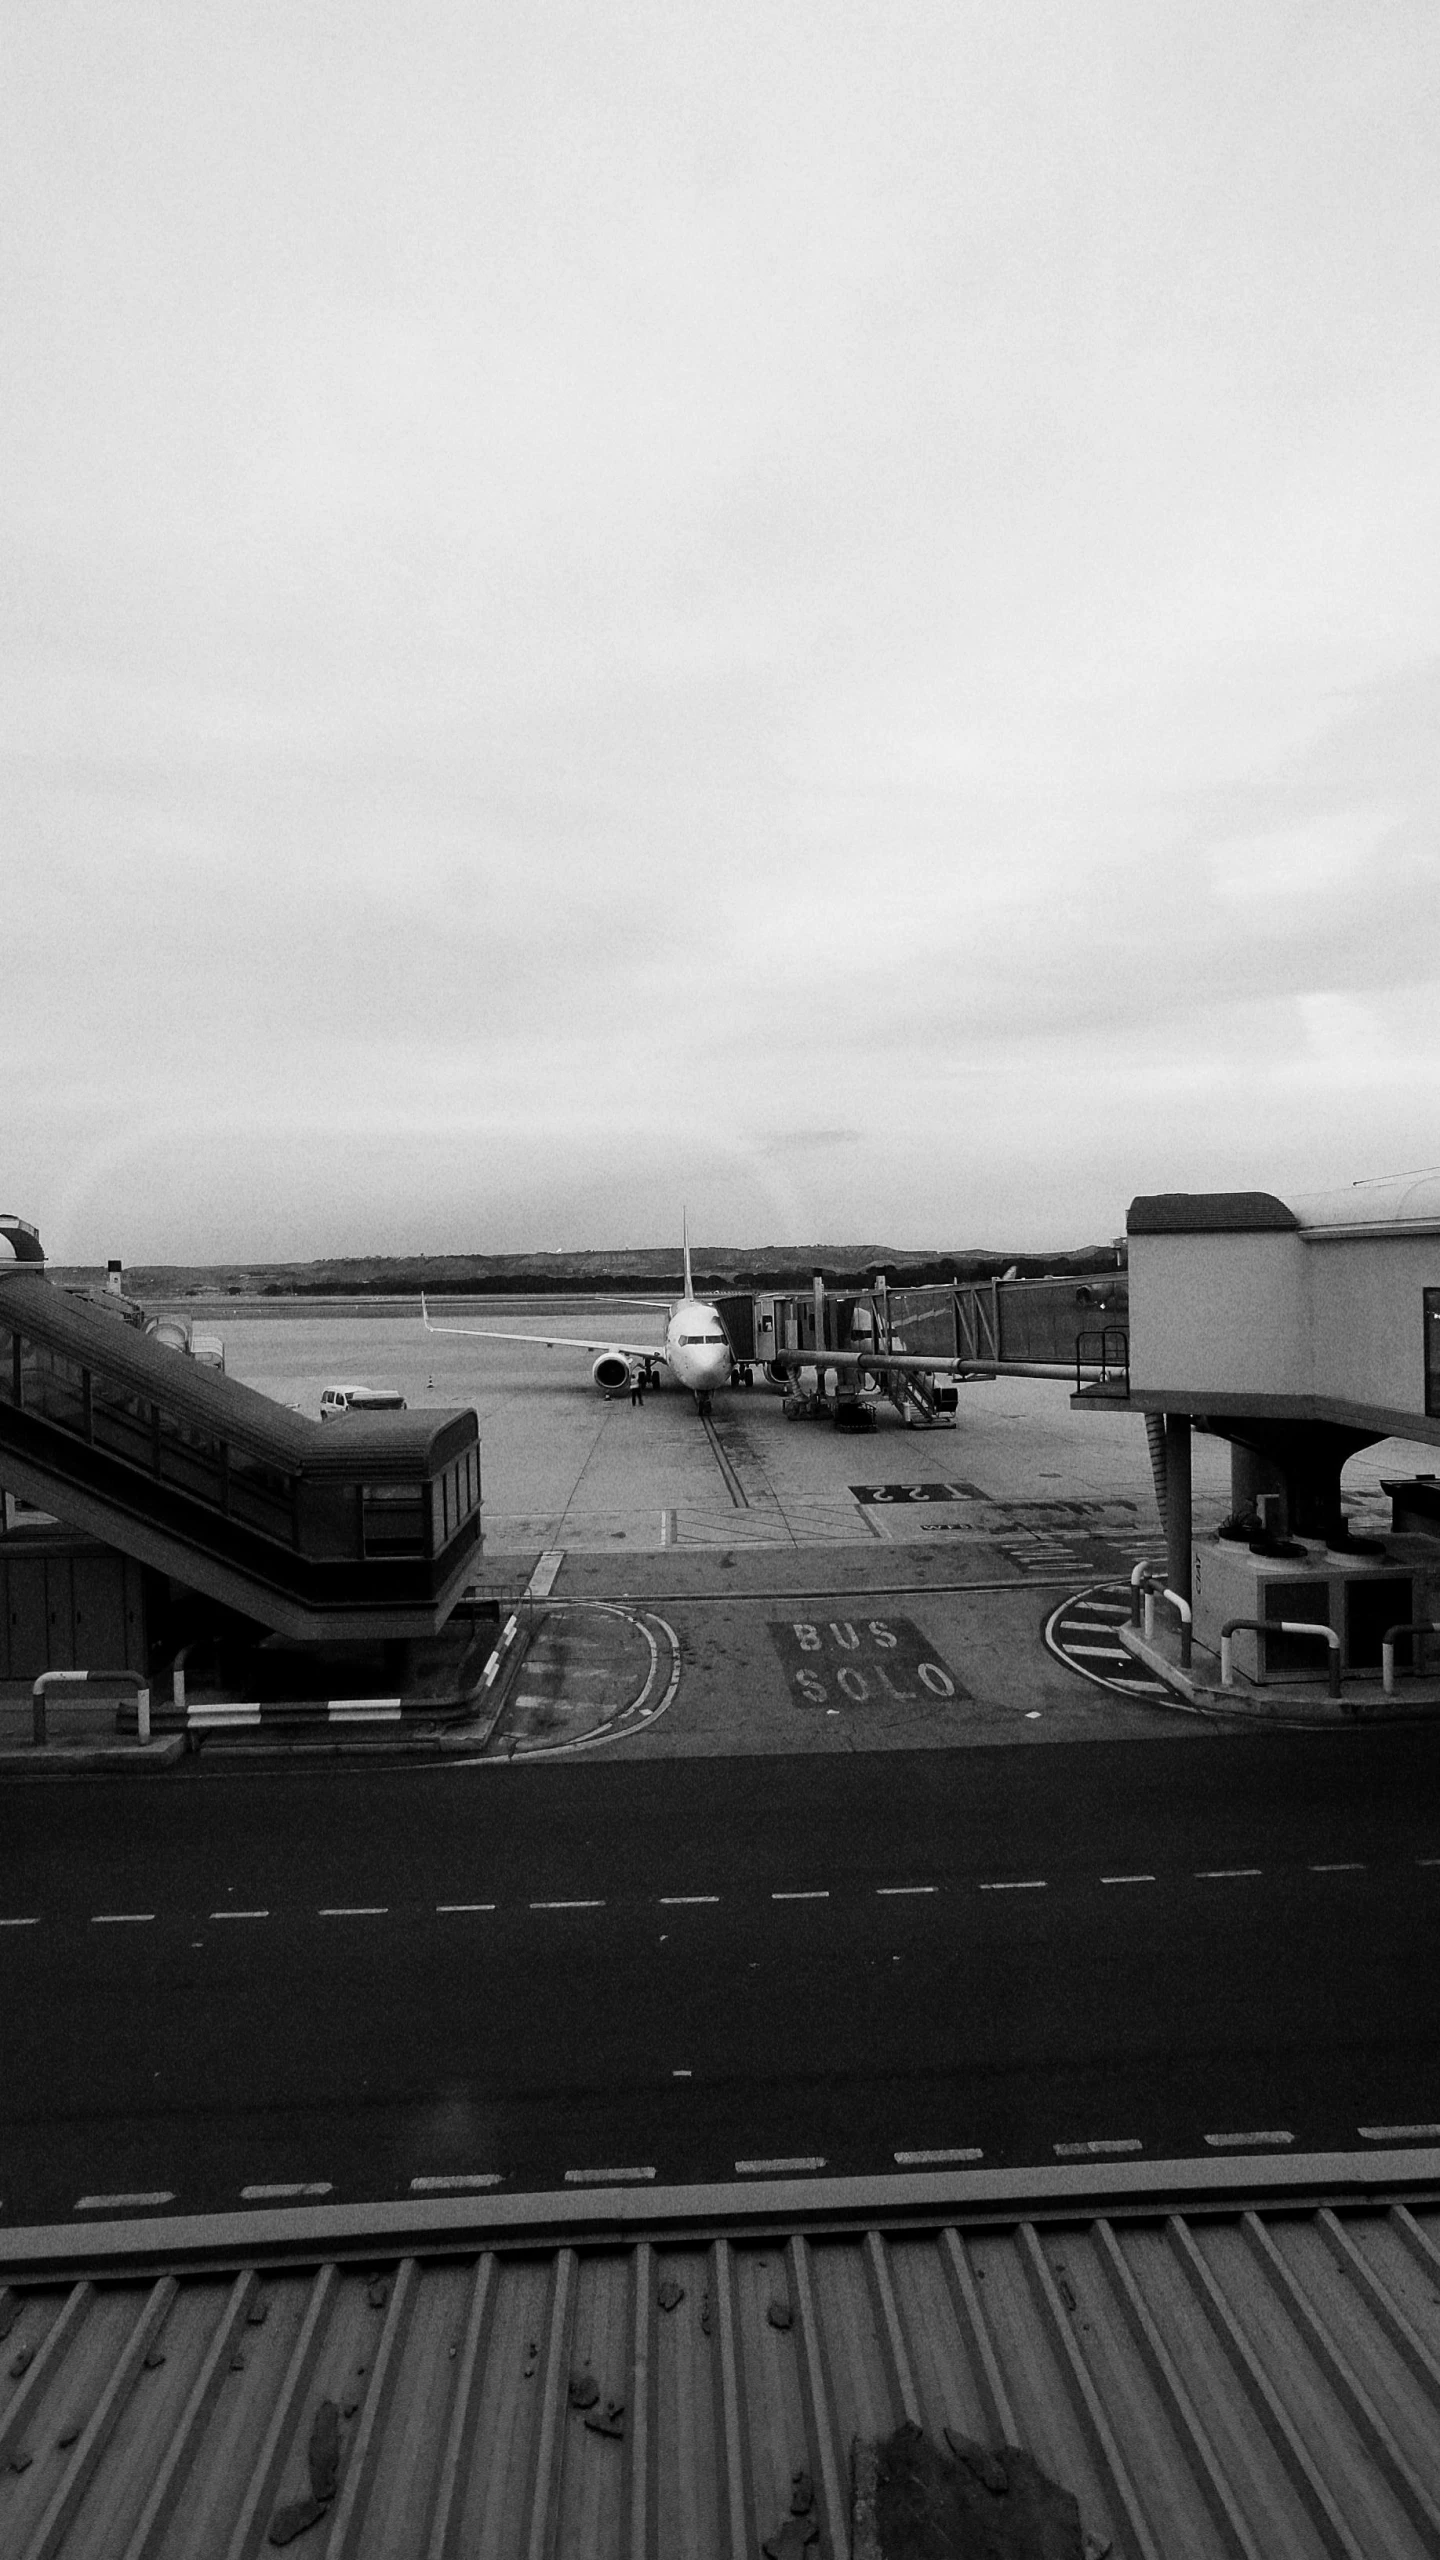 black and white image of an airport with several airplanes parked in the background